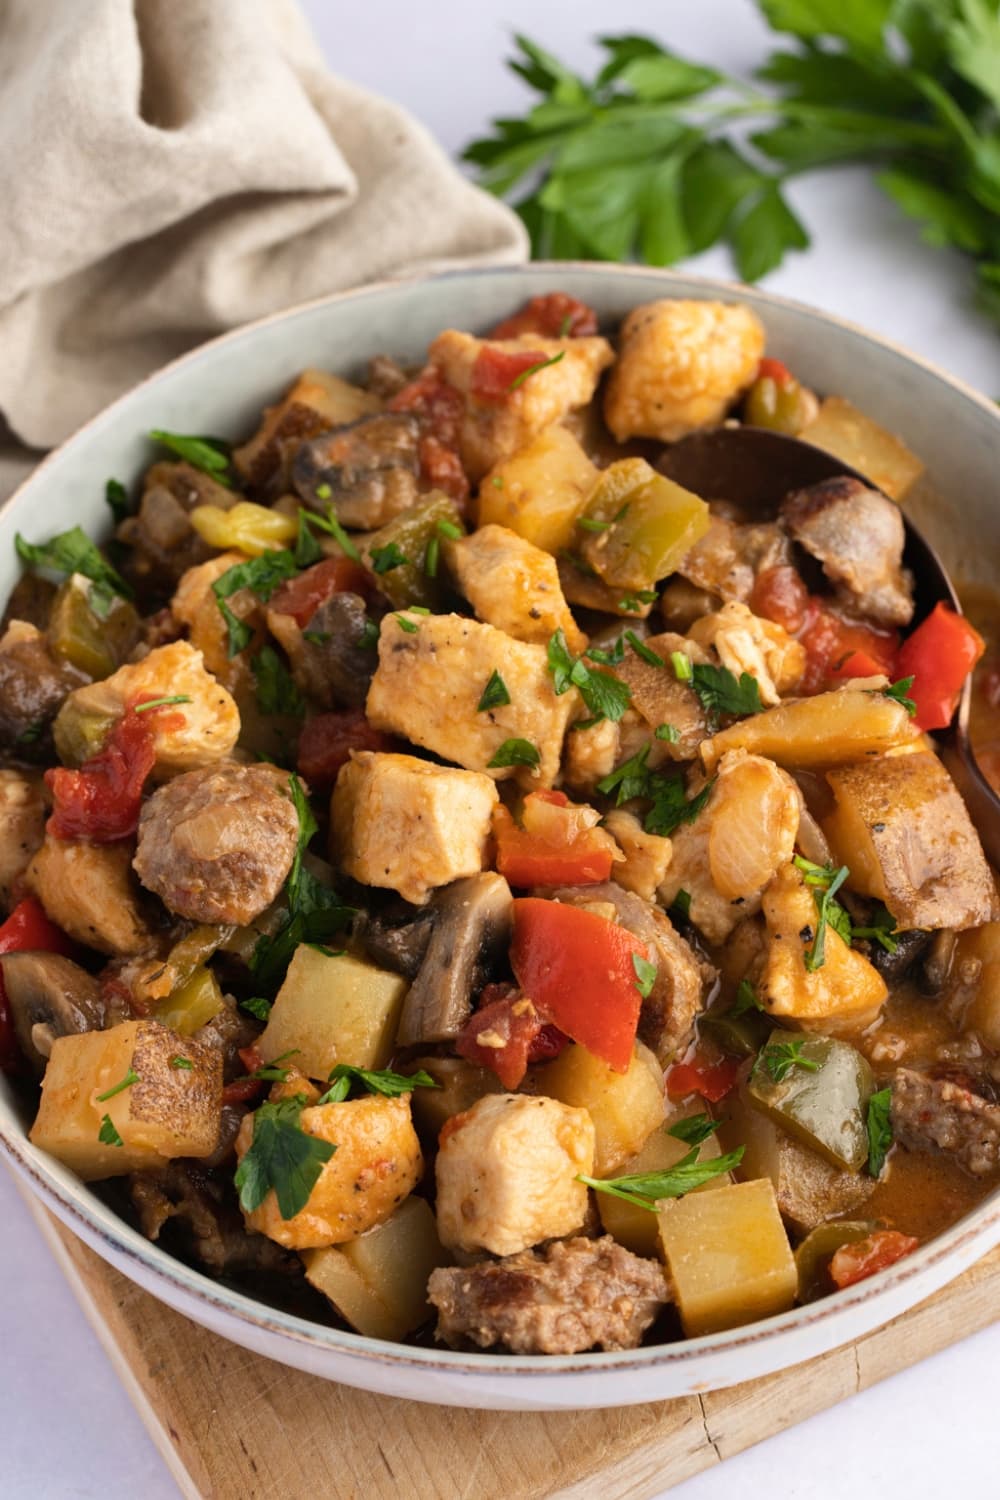 Chicken Murphy with Sausage, Peppers and Mushrooms in a Bowl